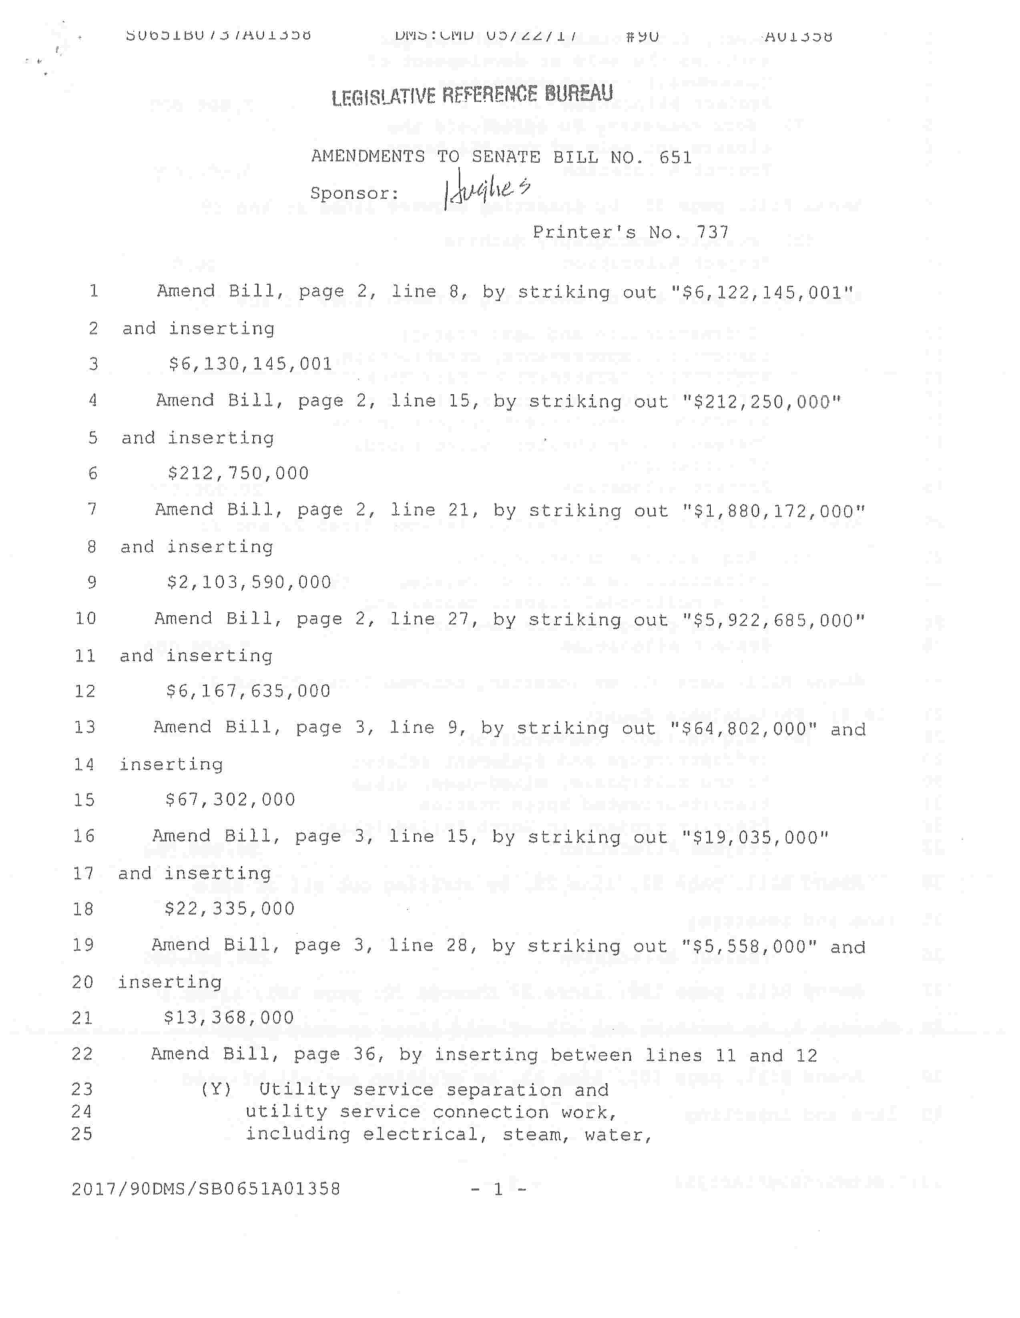 2 and Inserting 4 Amend Bill, Page 2, Line 15, by Std.King Out